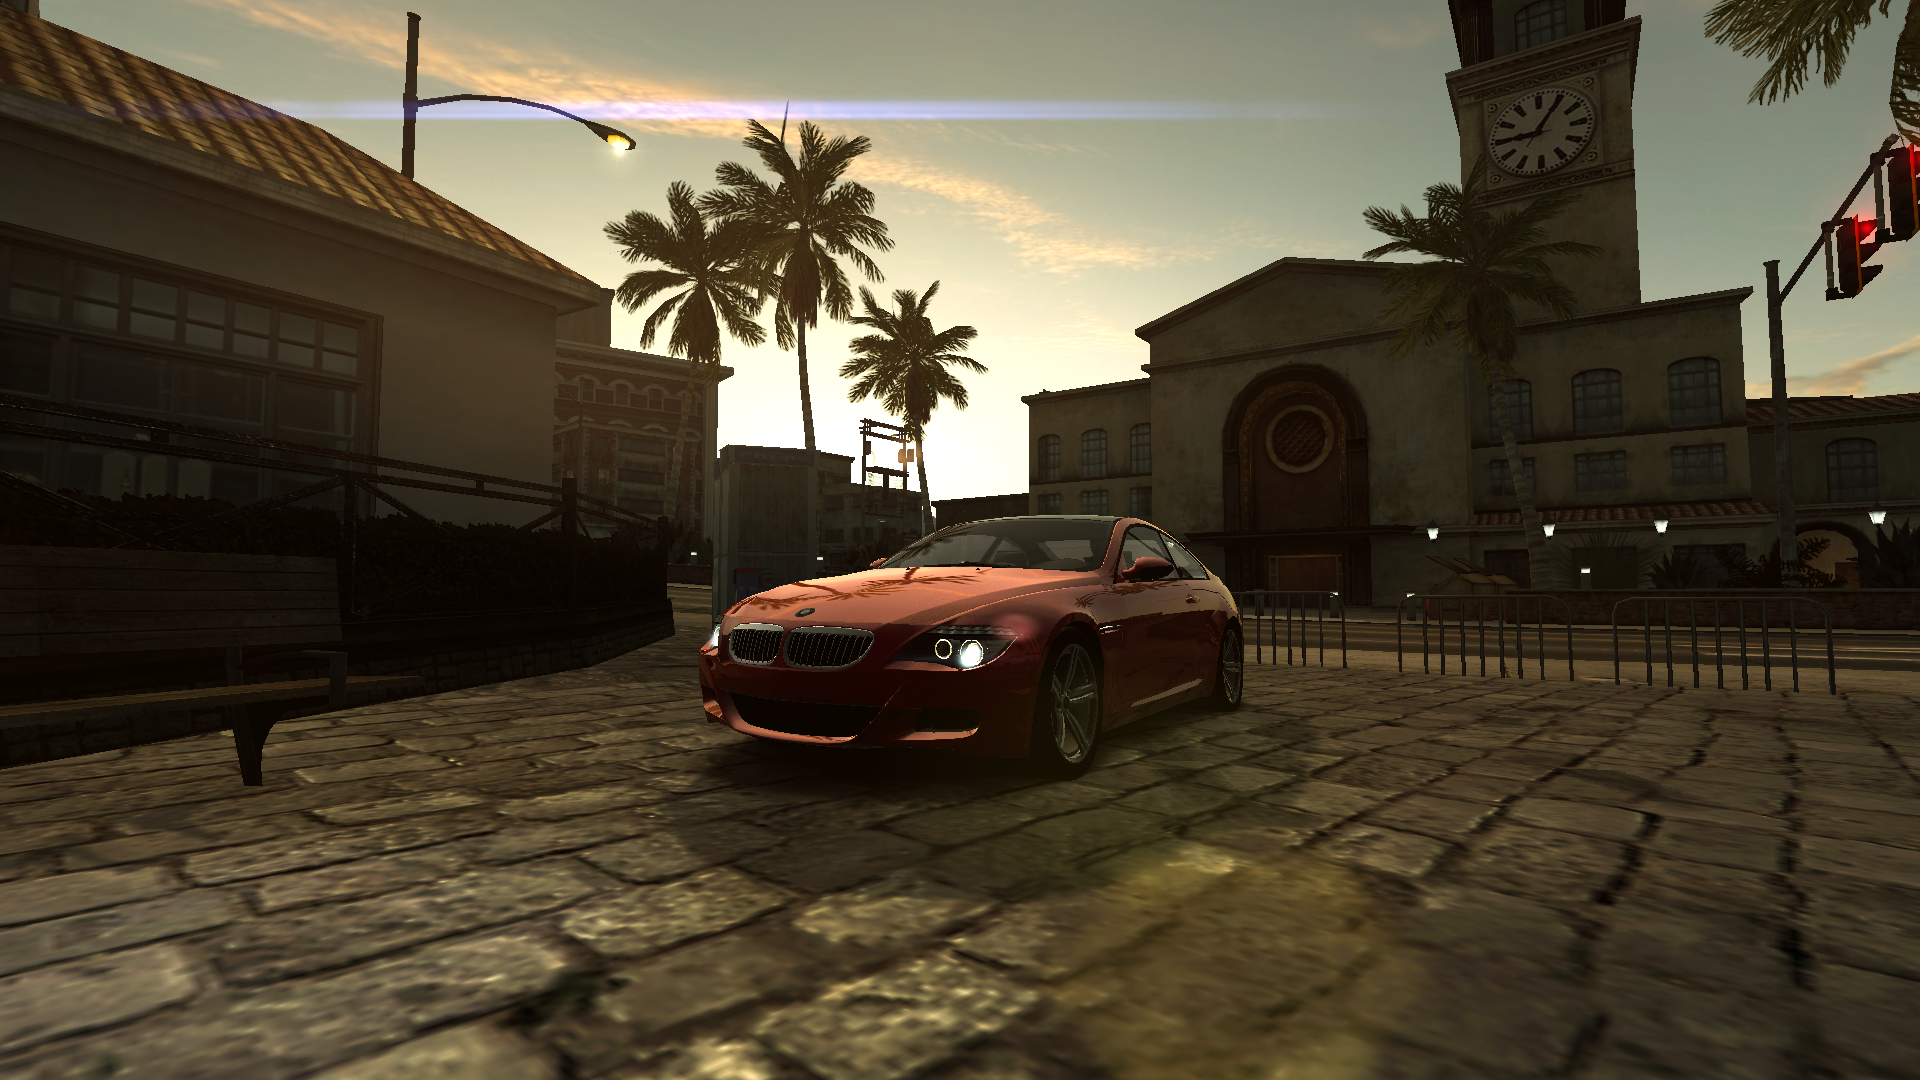 General 1920x1080 Need for Speed: World BMW car vehicle red cars video games PC gaming screen shot clocks palm trees